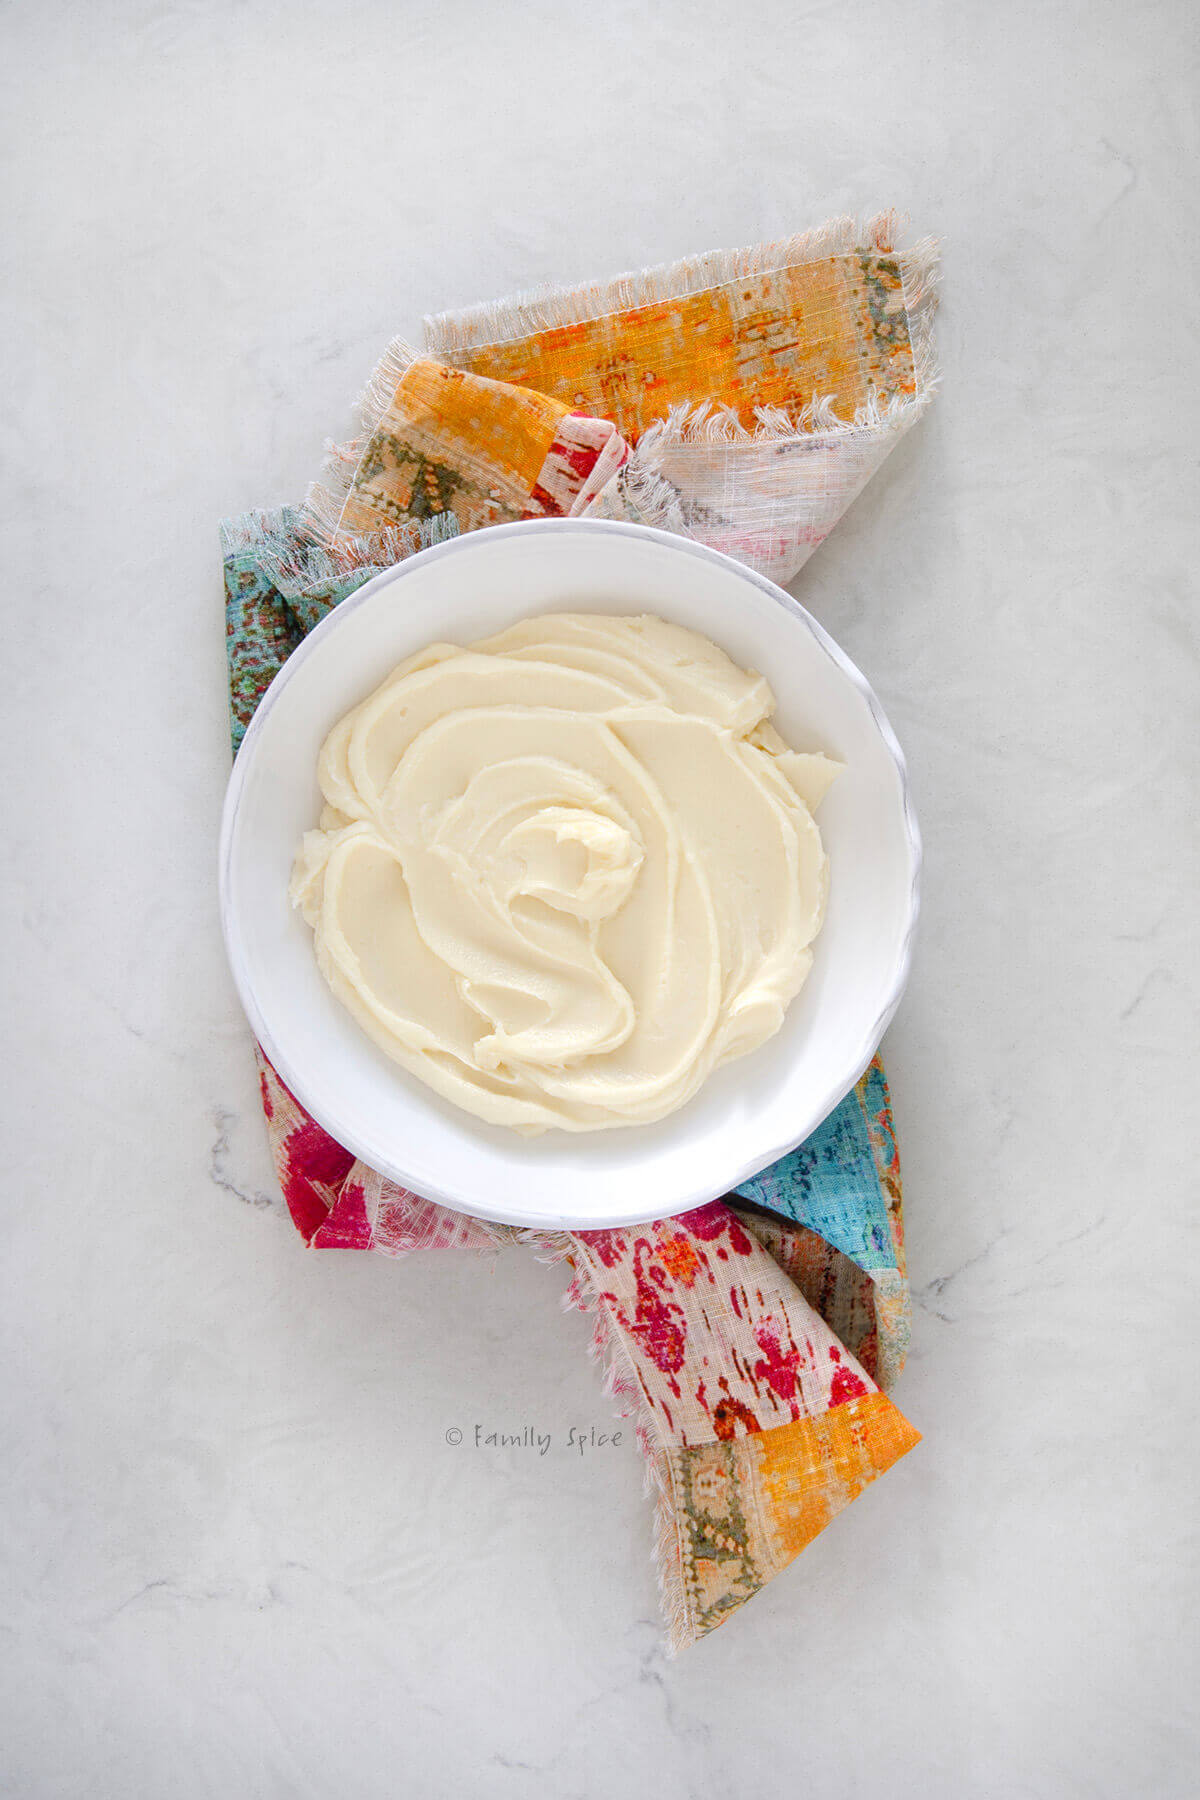 Top view of a white shallow bowl with whipped brie in it on a colorful napkin